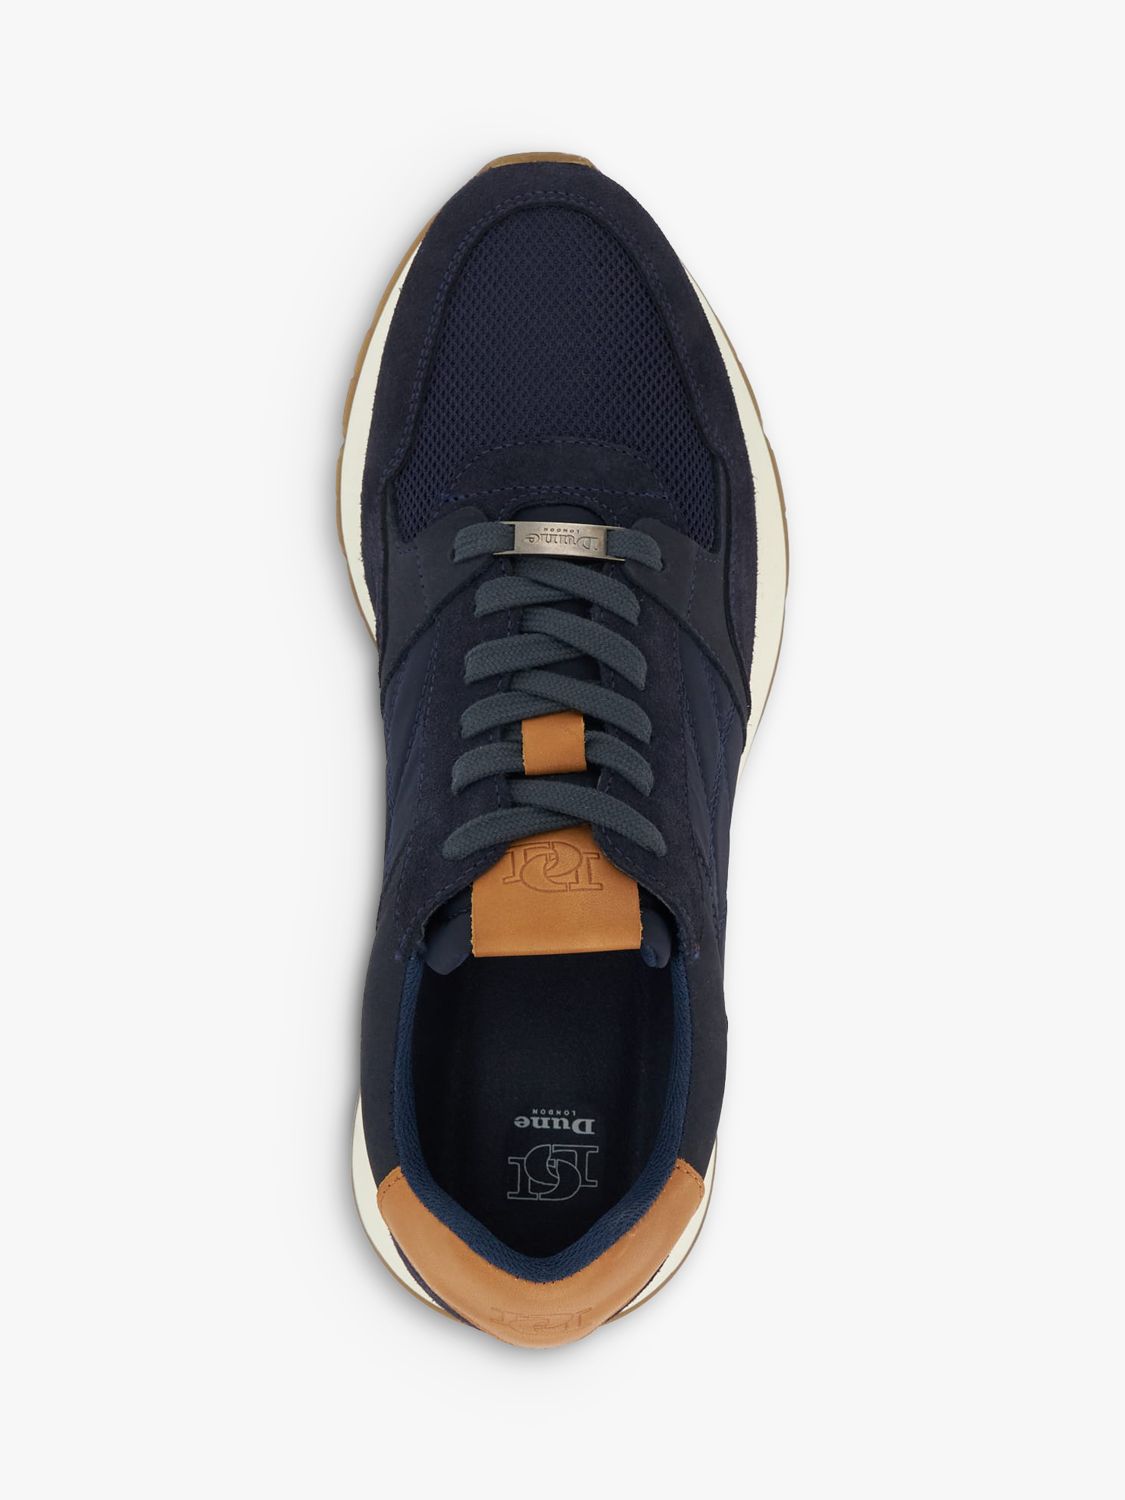 Dune Tangent Suede Trainers, Navy/Brown at John Lewis & Partners